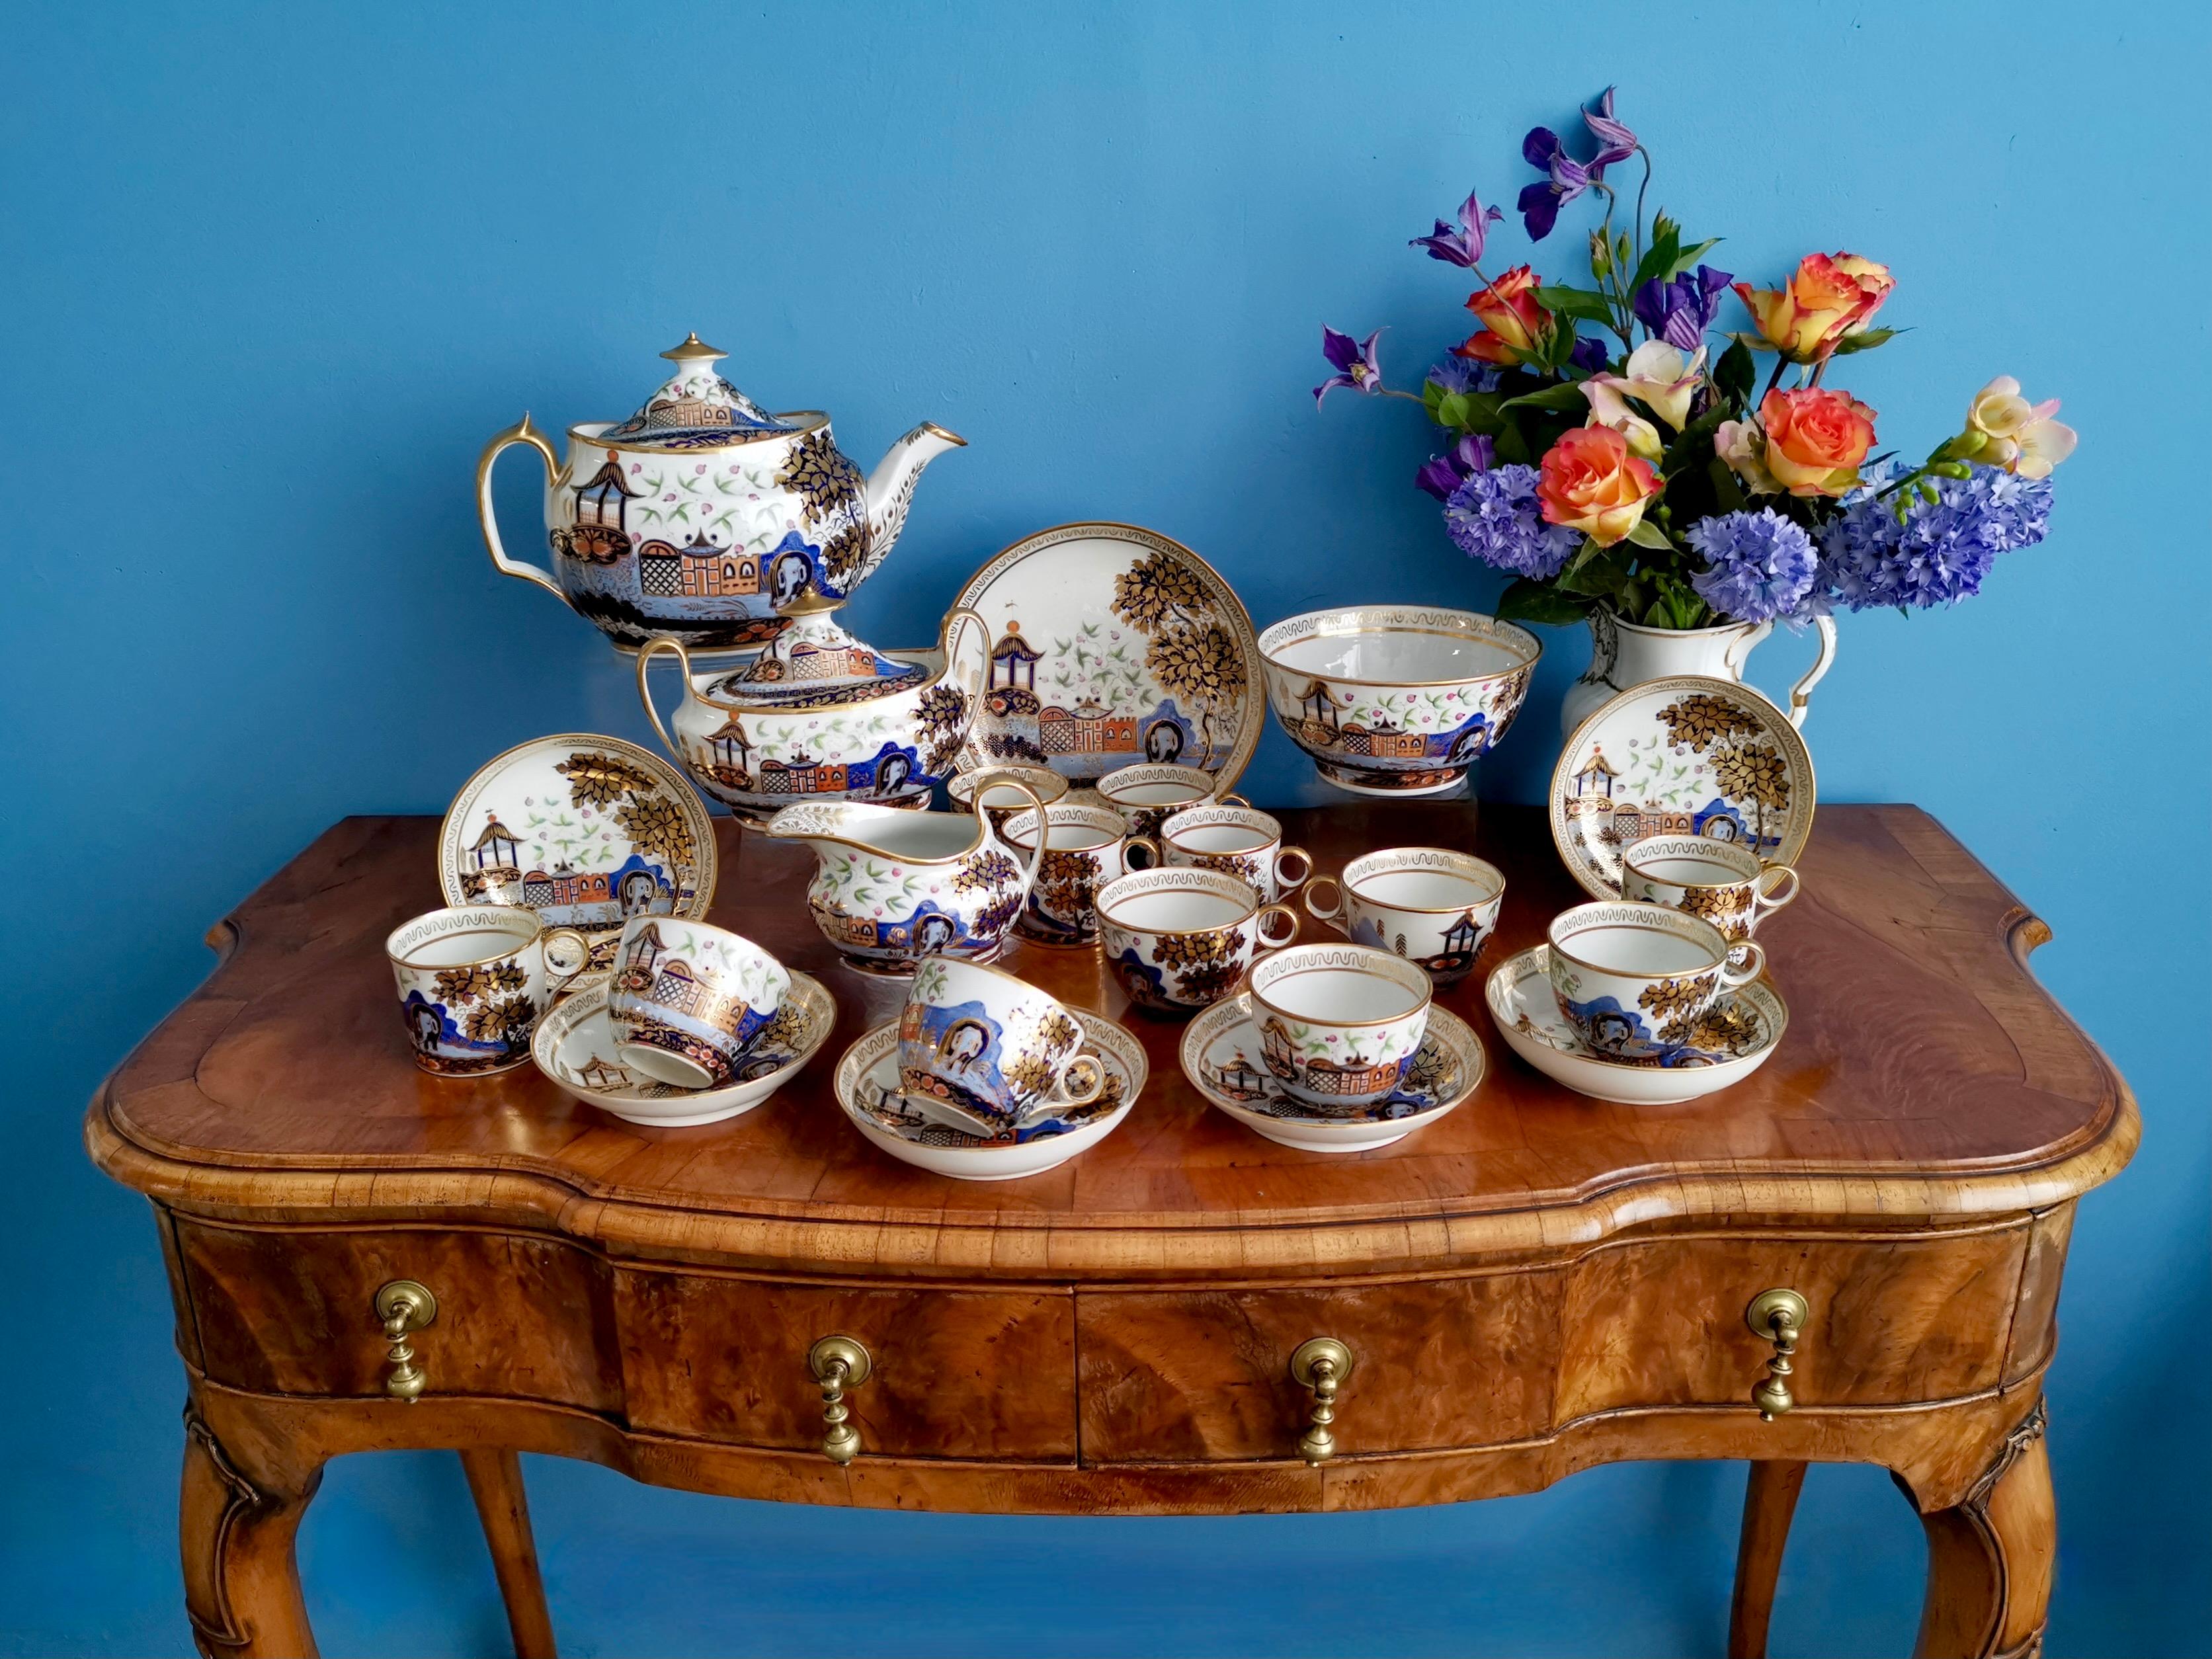 This is spectacular full tea service for six made by New Hall around the year 1810. The service consists of a teapot with cover, a sucrier with cover, a milk jug, six trios each consisting of a teacup, a coffee can and a saucer, a cake plate (saucer